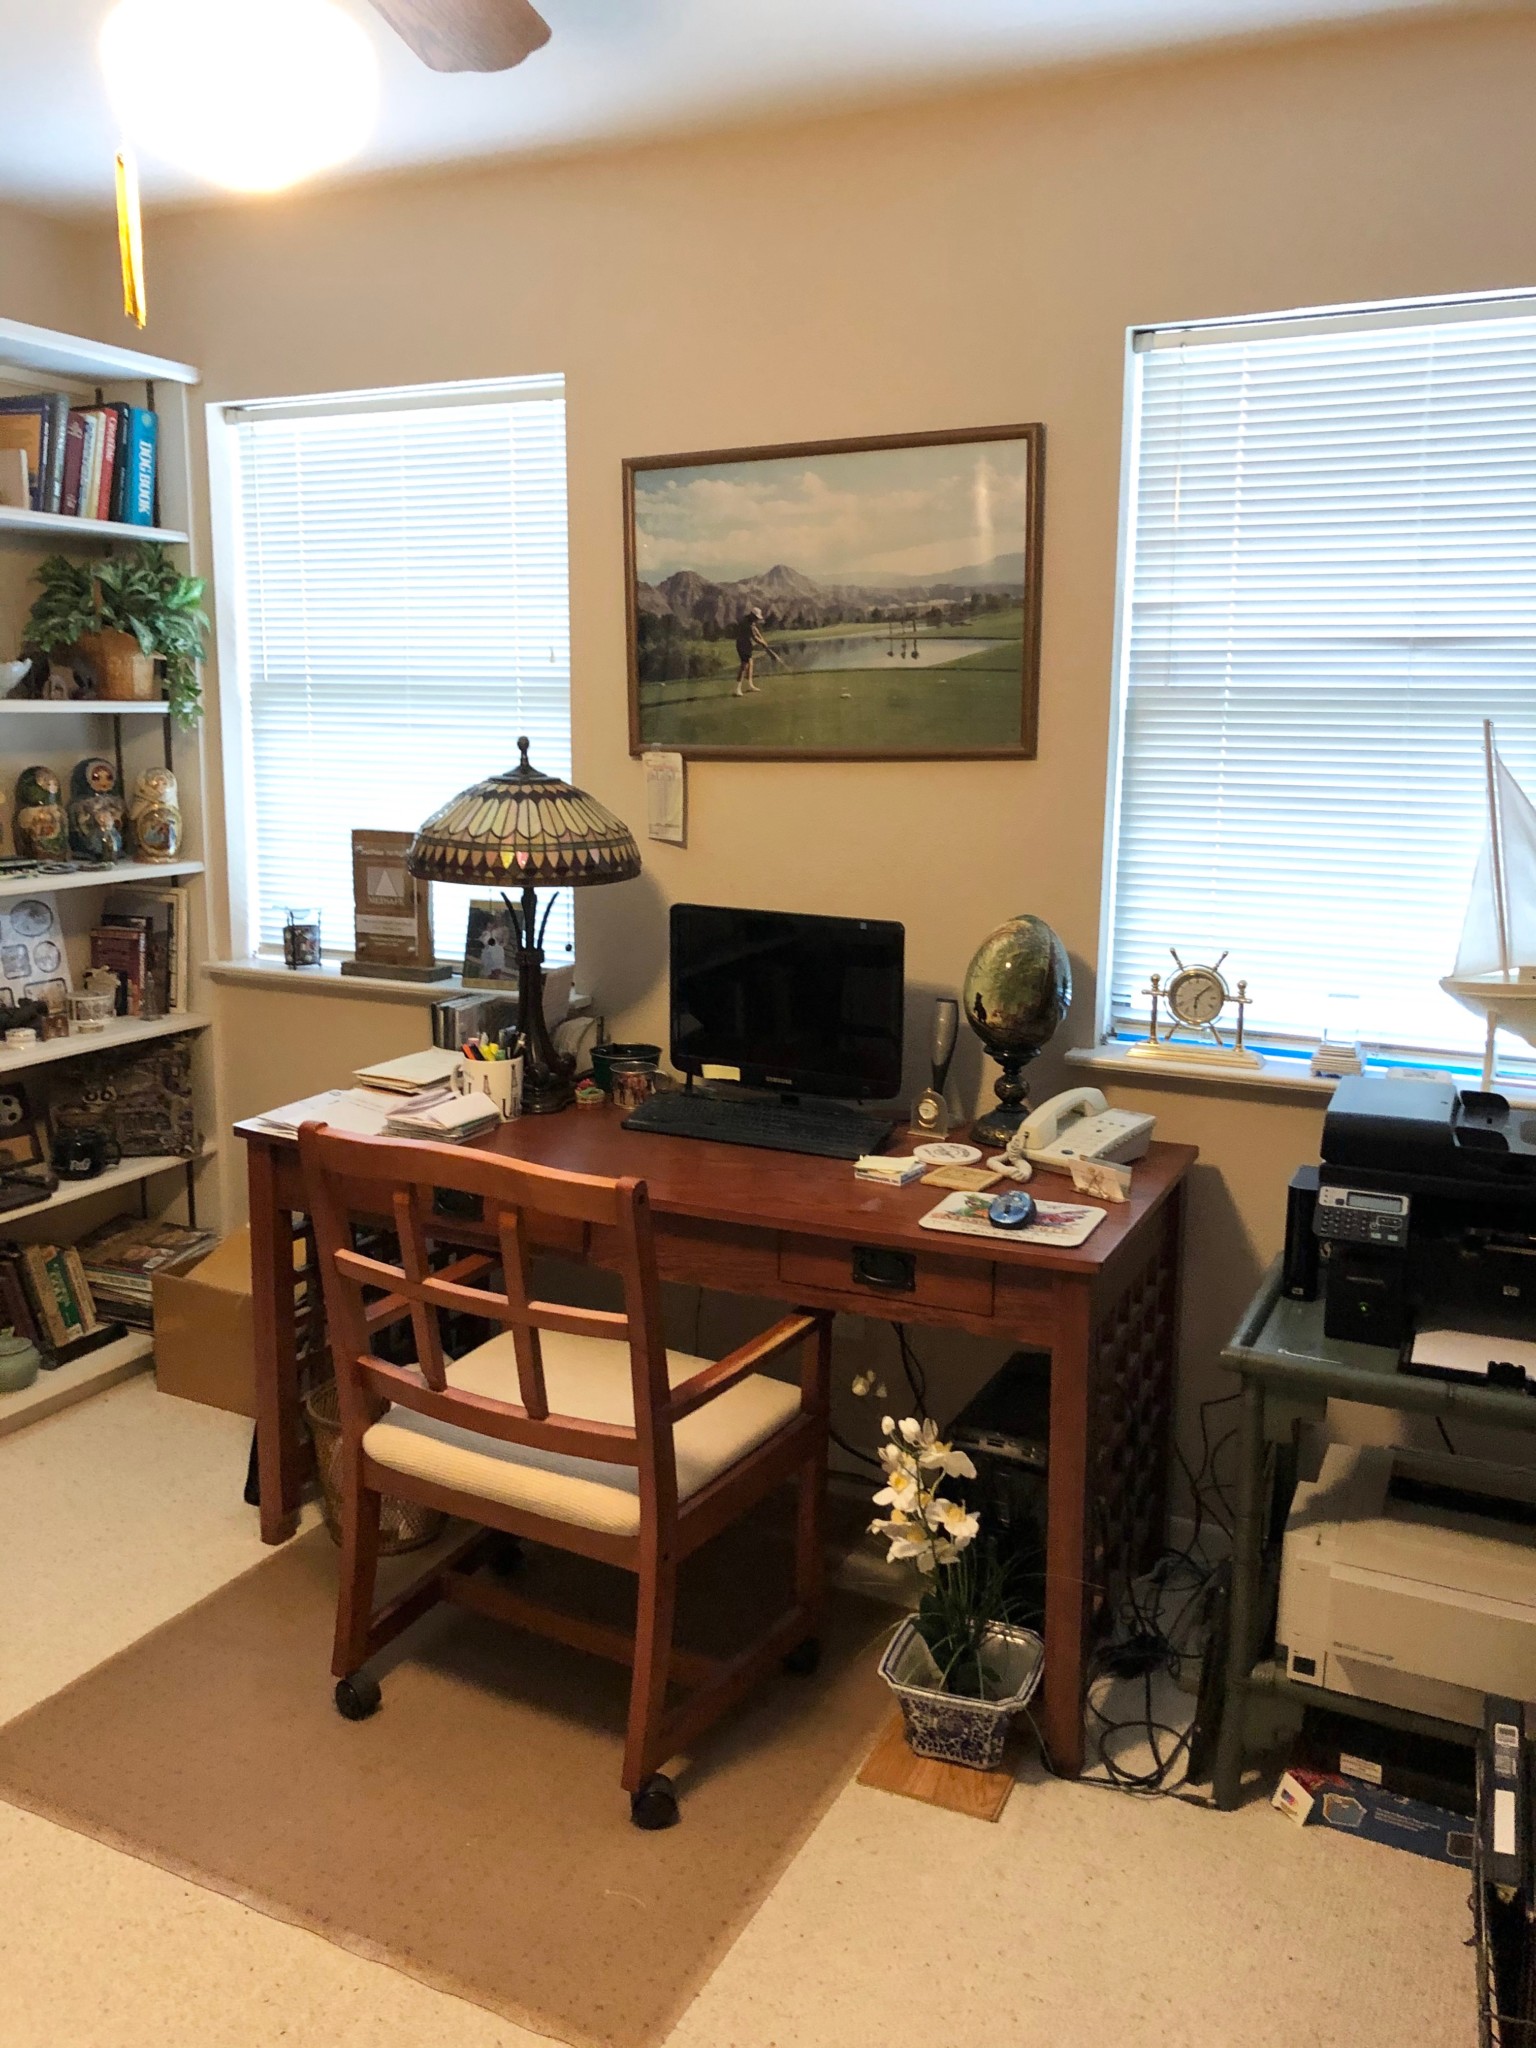 Memorial home organizing services - office before